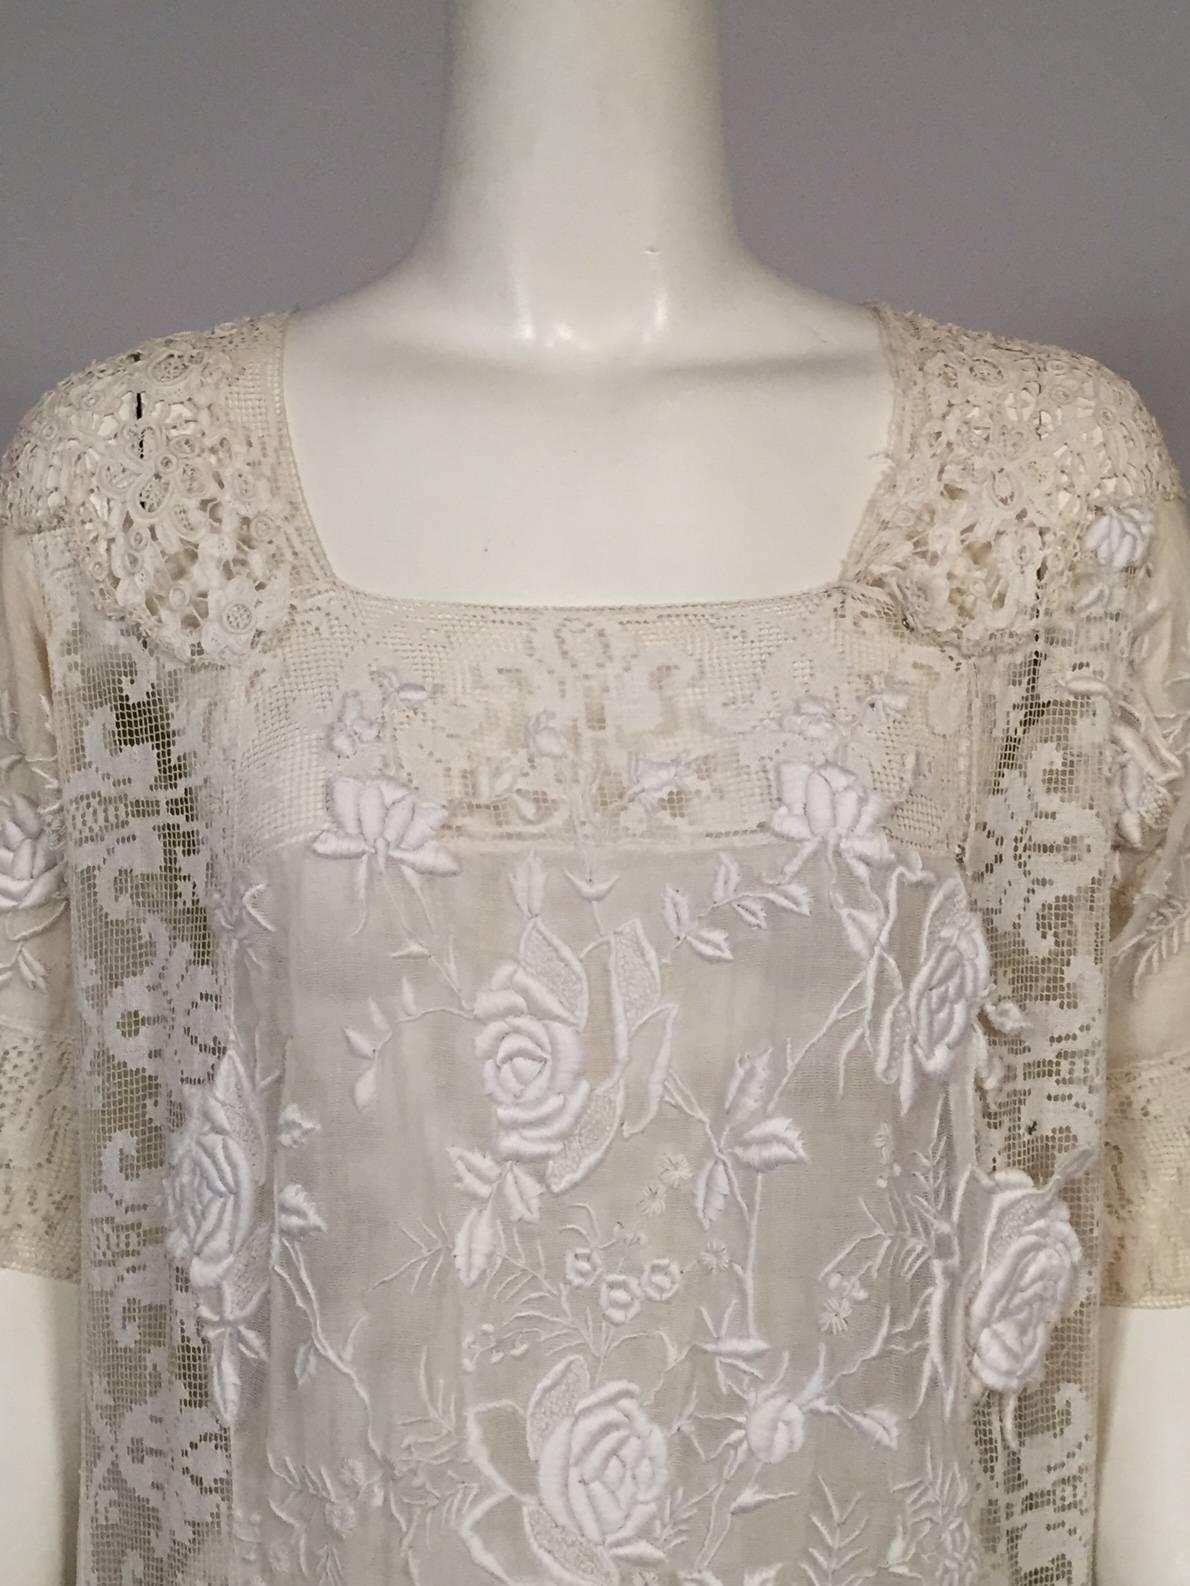 A stunning combination of mixed lace and embroidery is combined to make this 1920's chemise style dress. It has a square neckline, short sleeves, a snap closure on the left side of the front. It will fit a range of sizes with the addition of a